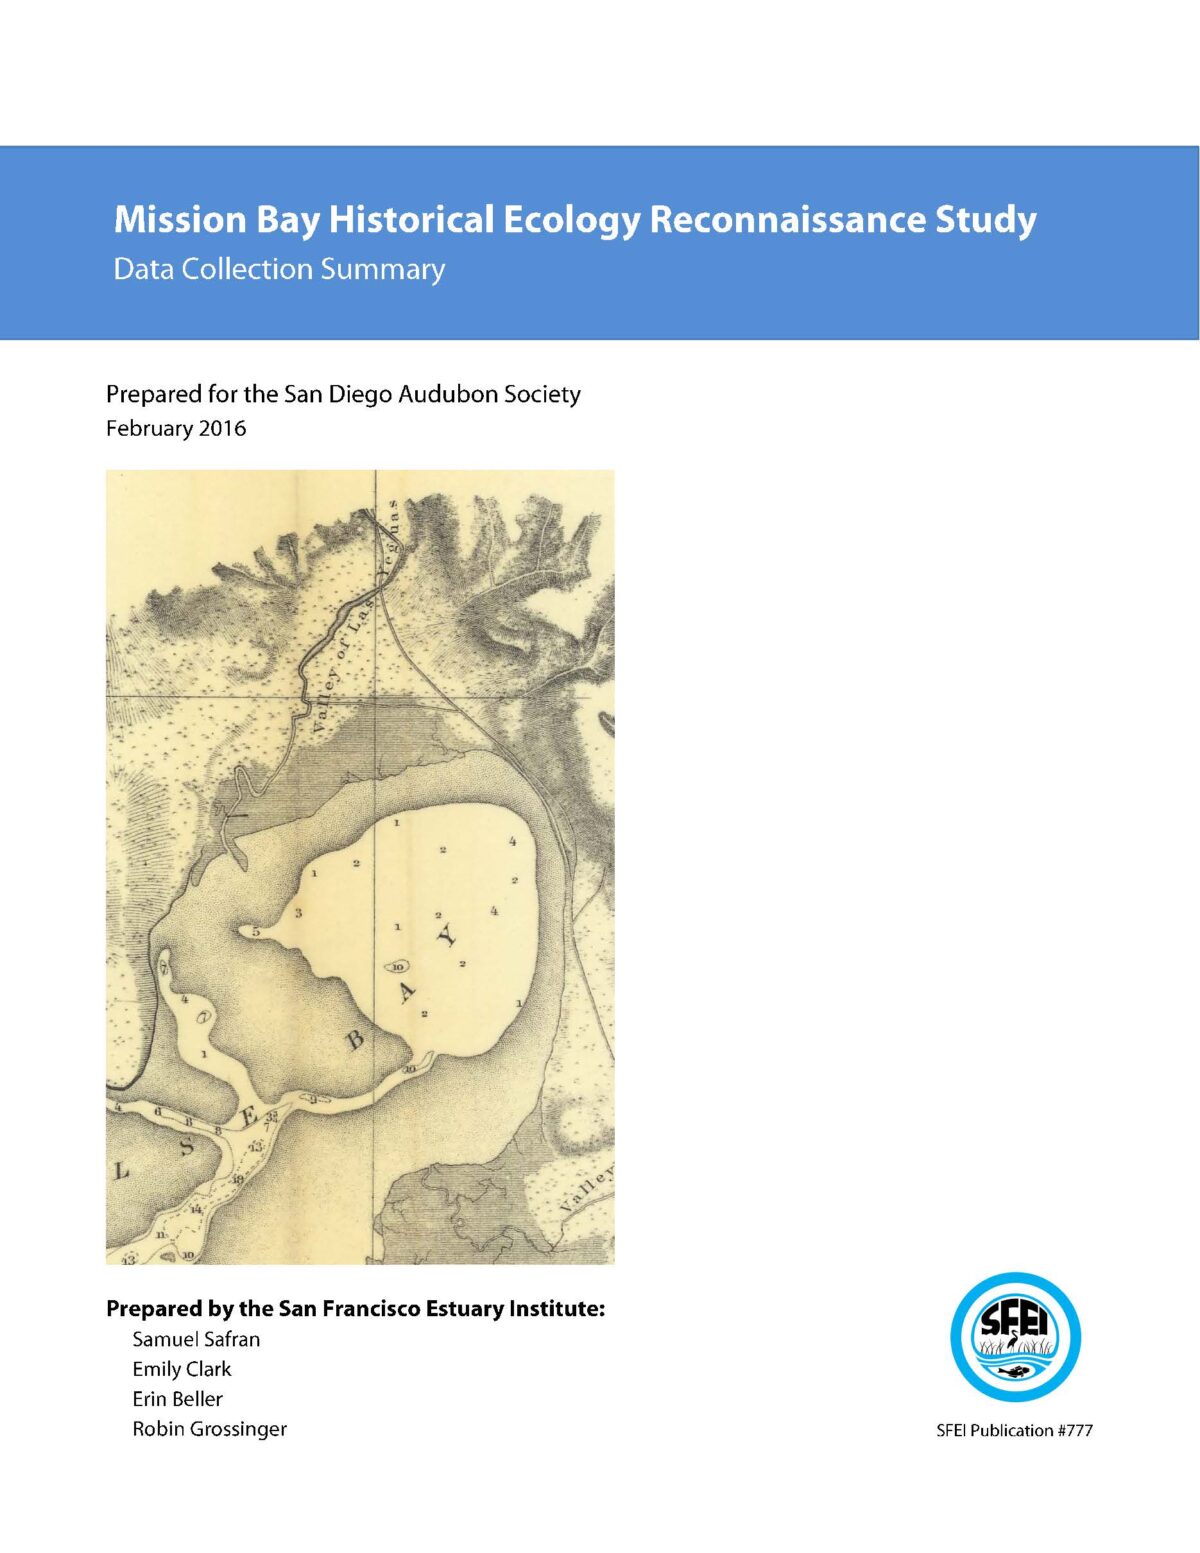 Mission Bay Historical Ecology Reconnaissance Study: Data Collection Summary (Technical Report)